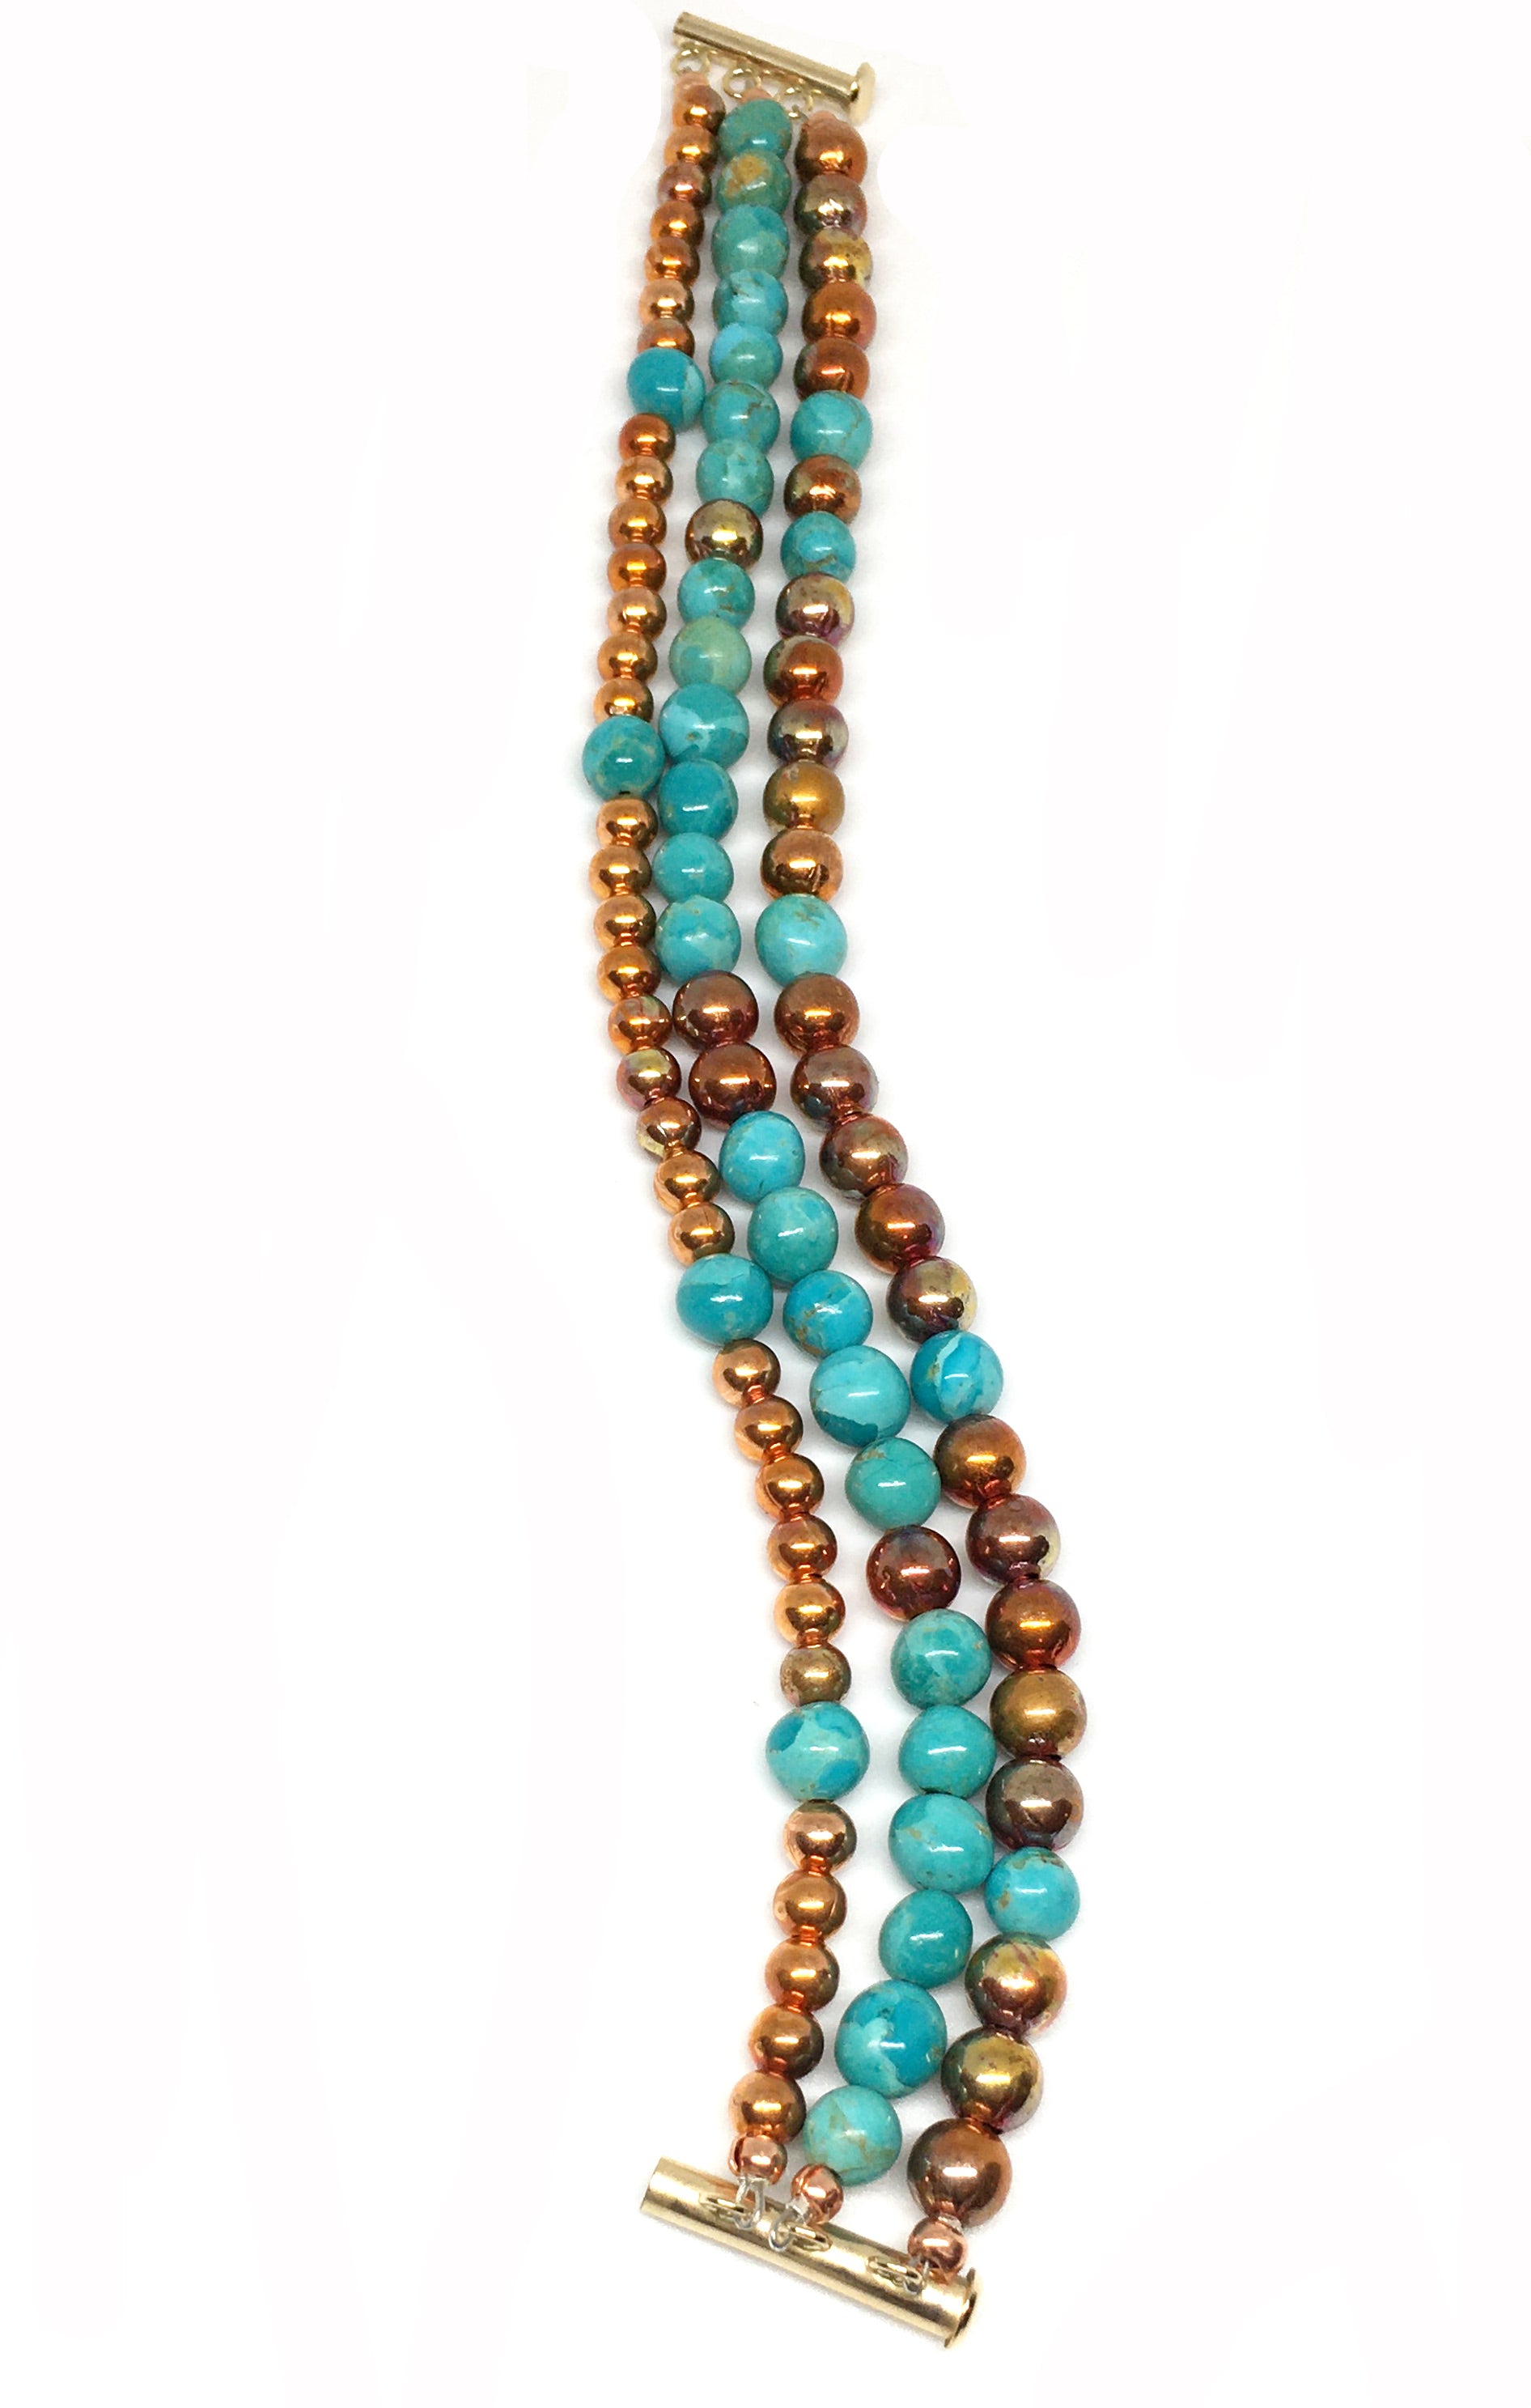 Triple Strand Kingman Turquoise and Flame Painted Copper Bead Bracelet